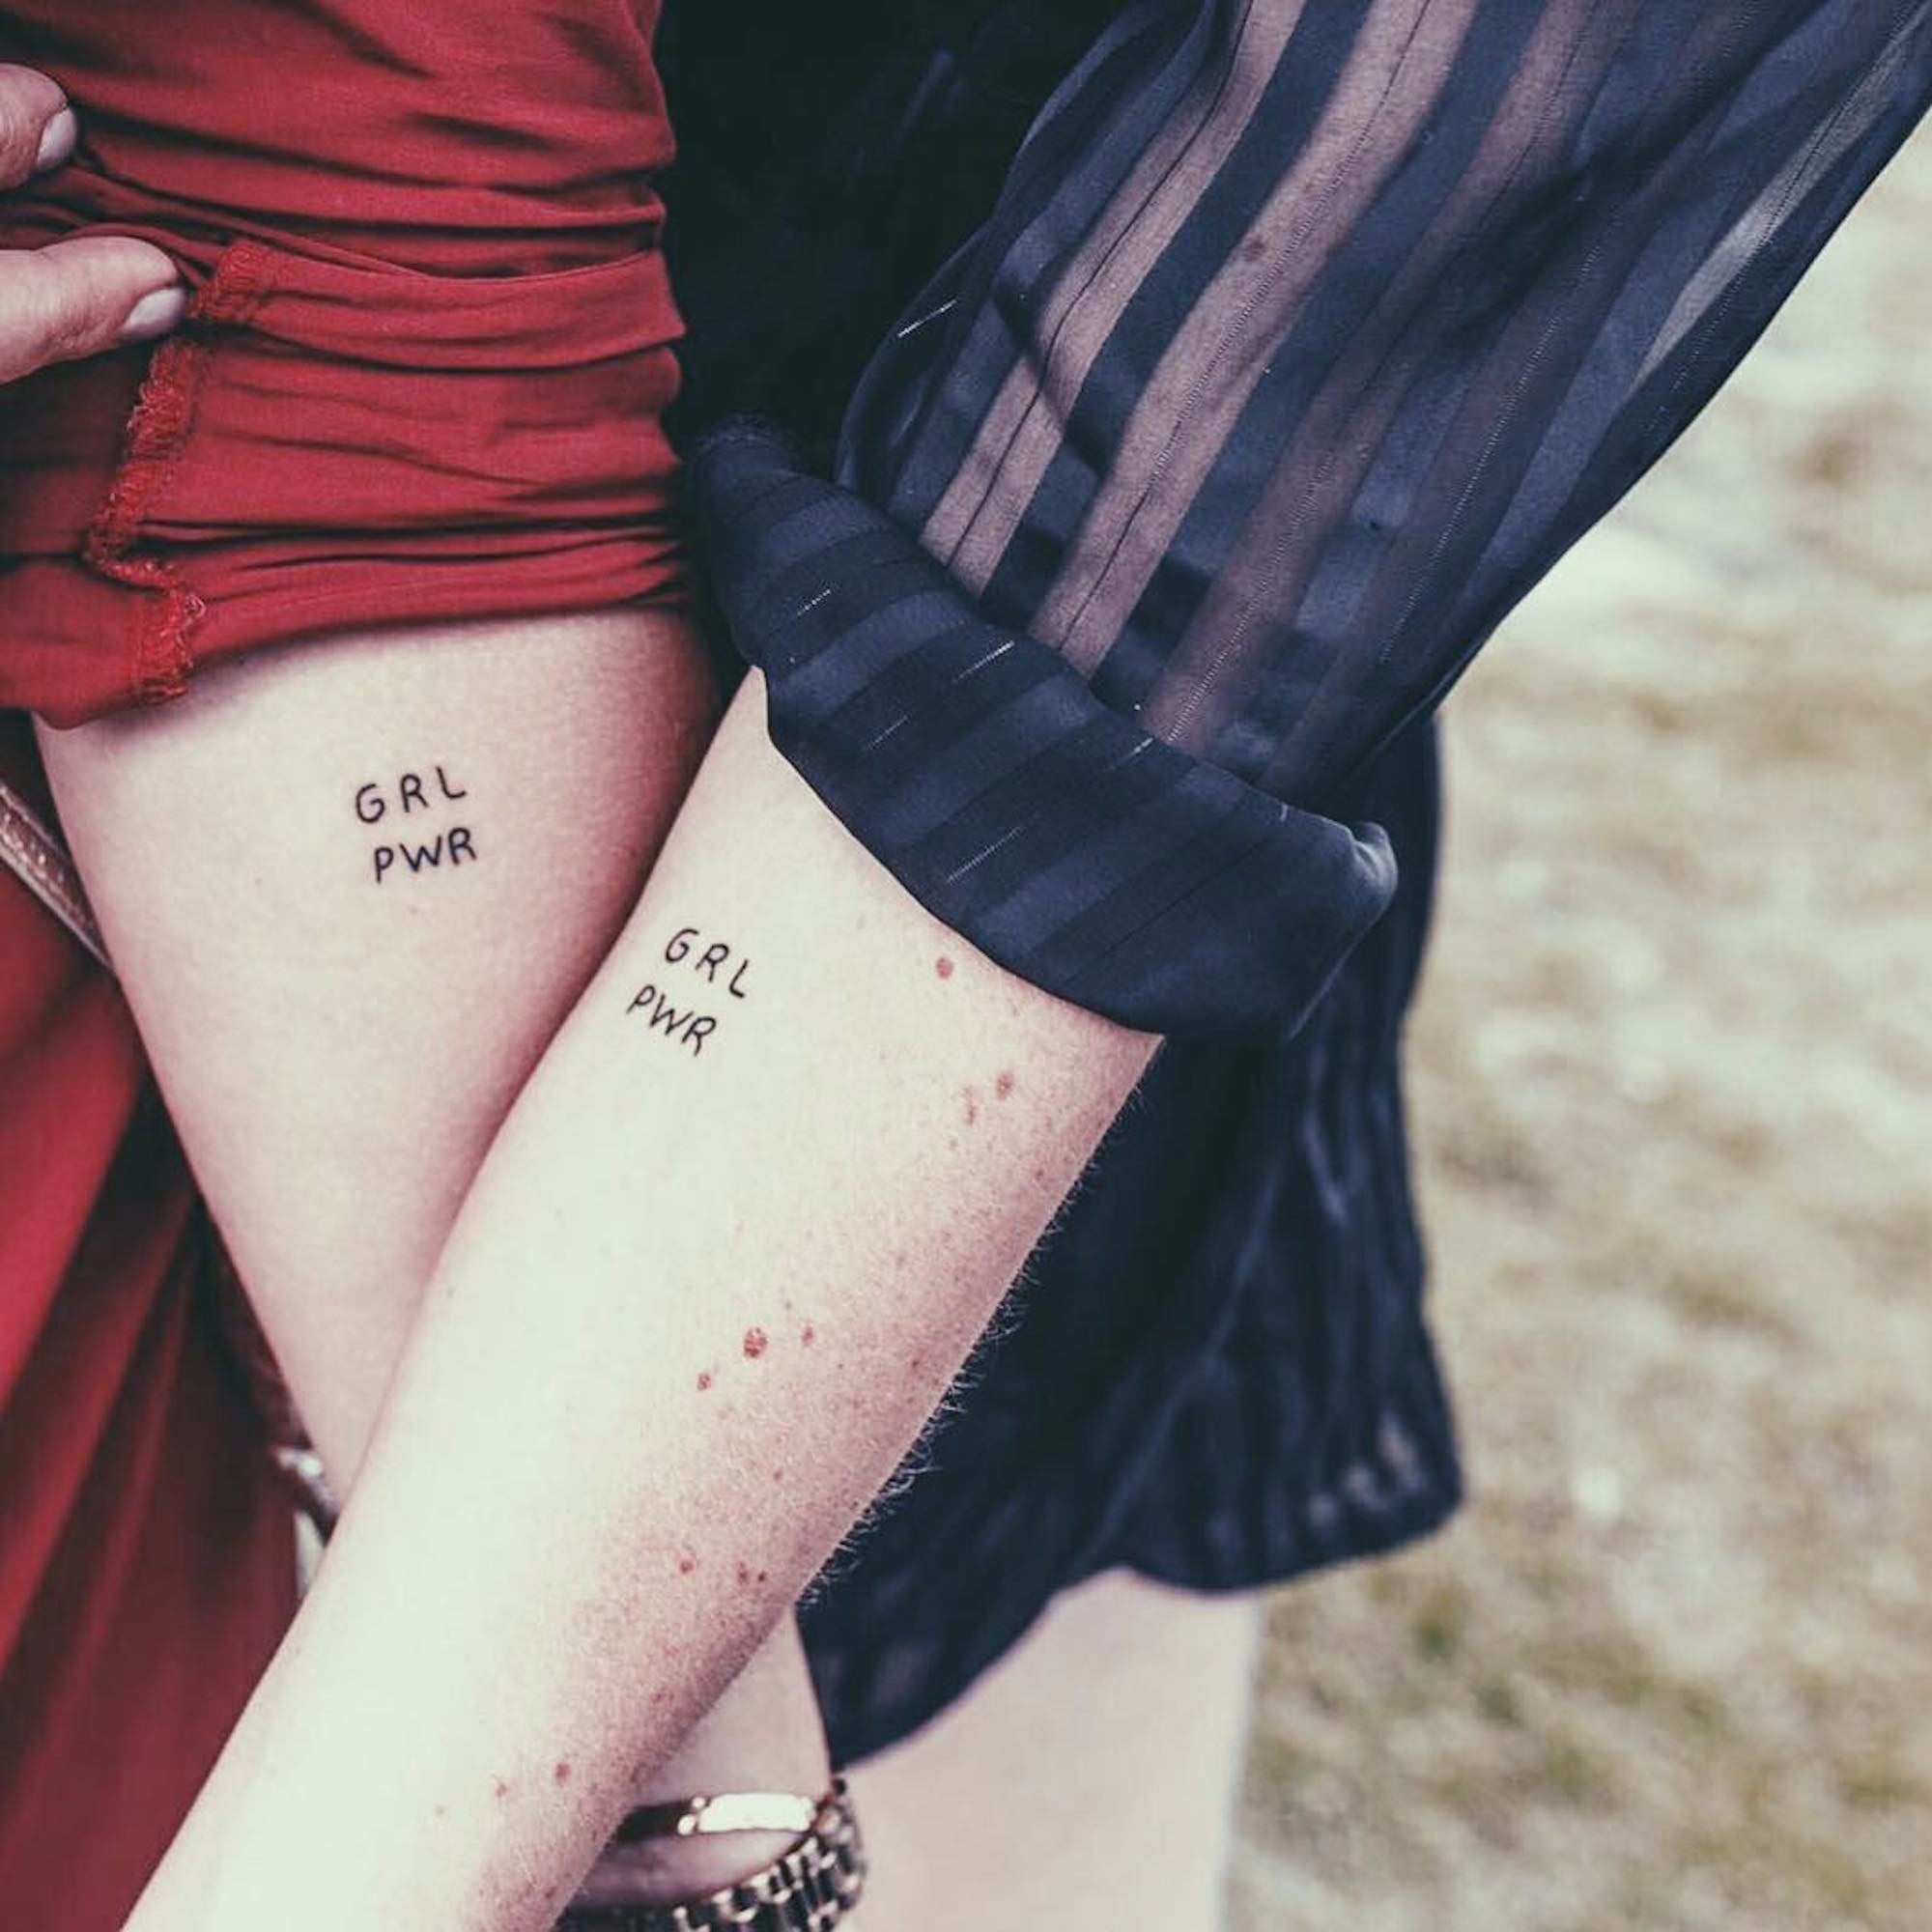 guy and girl best friend tattoo ideas